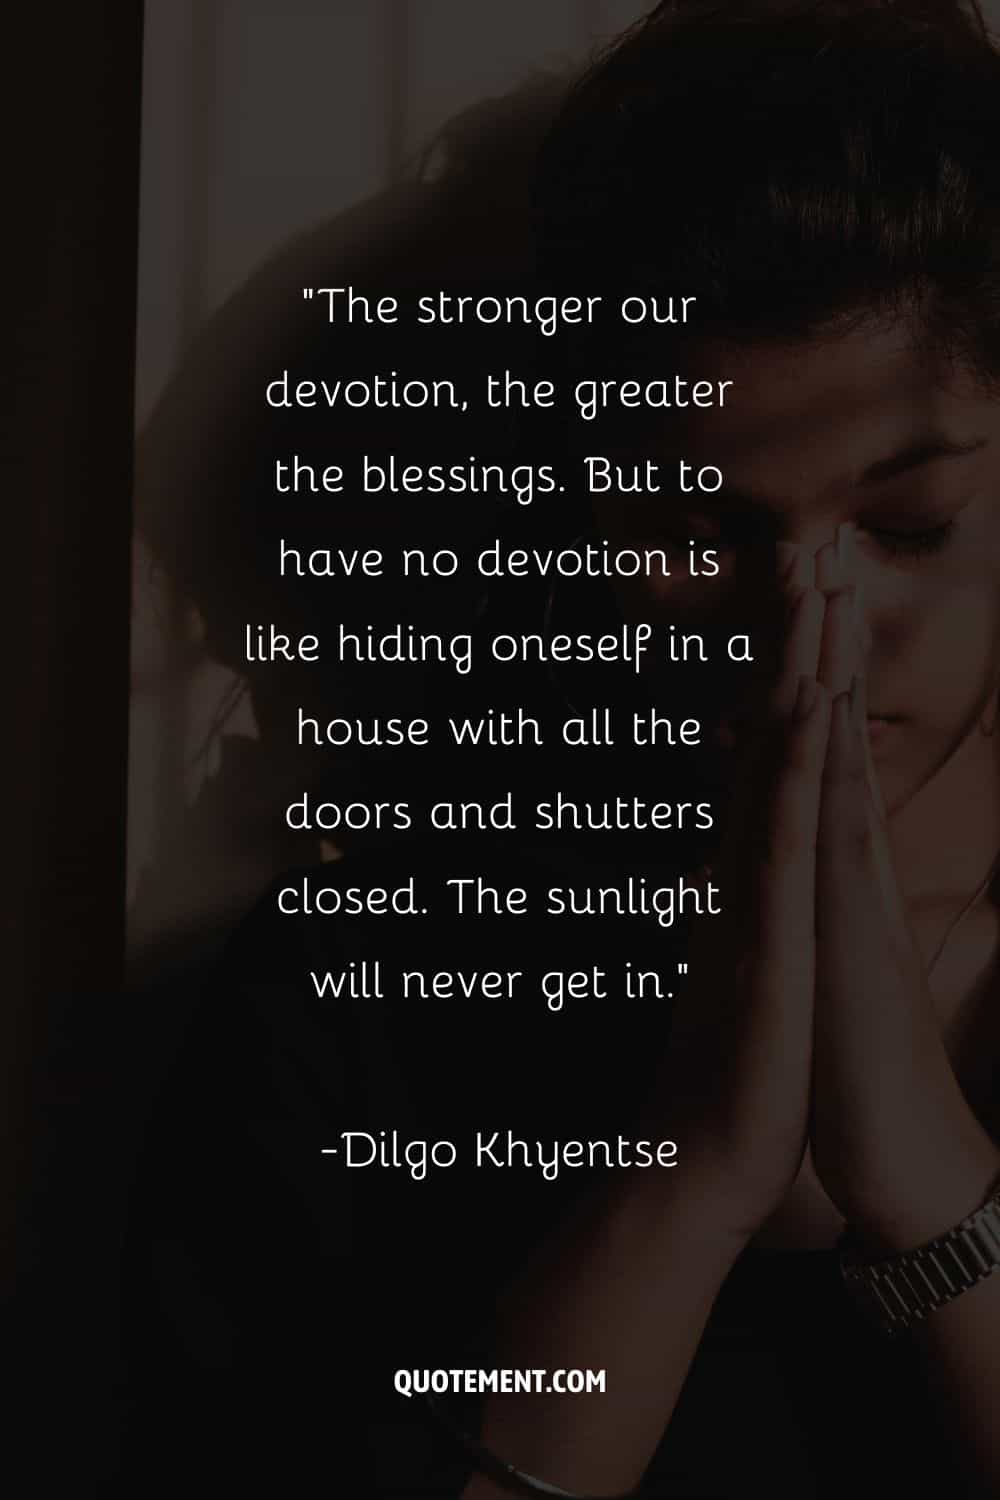 “The stronger our devotion, the greater the blessings. But to have no devotion is like hiding oneself in a house with all the doors and shutters closed. The sunlight will never get in.”